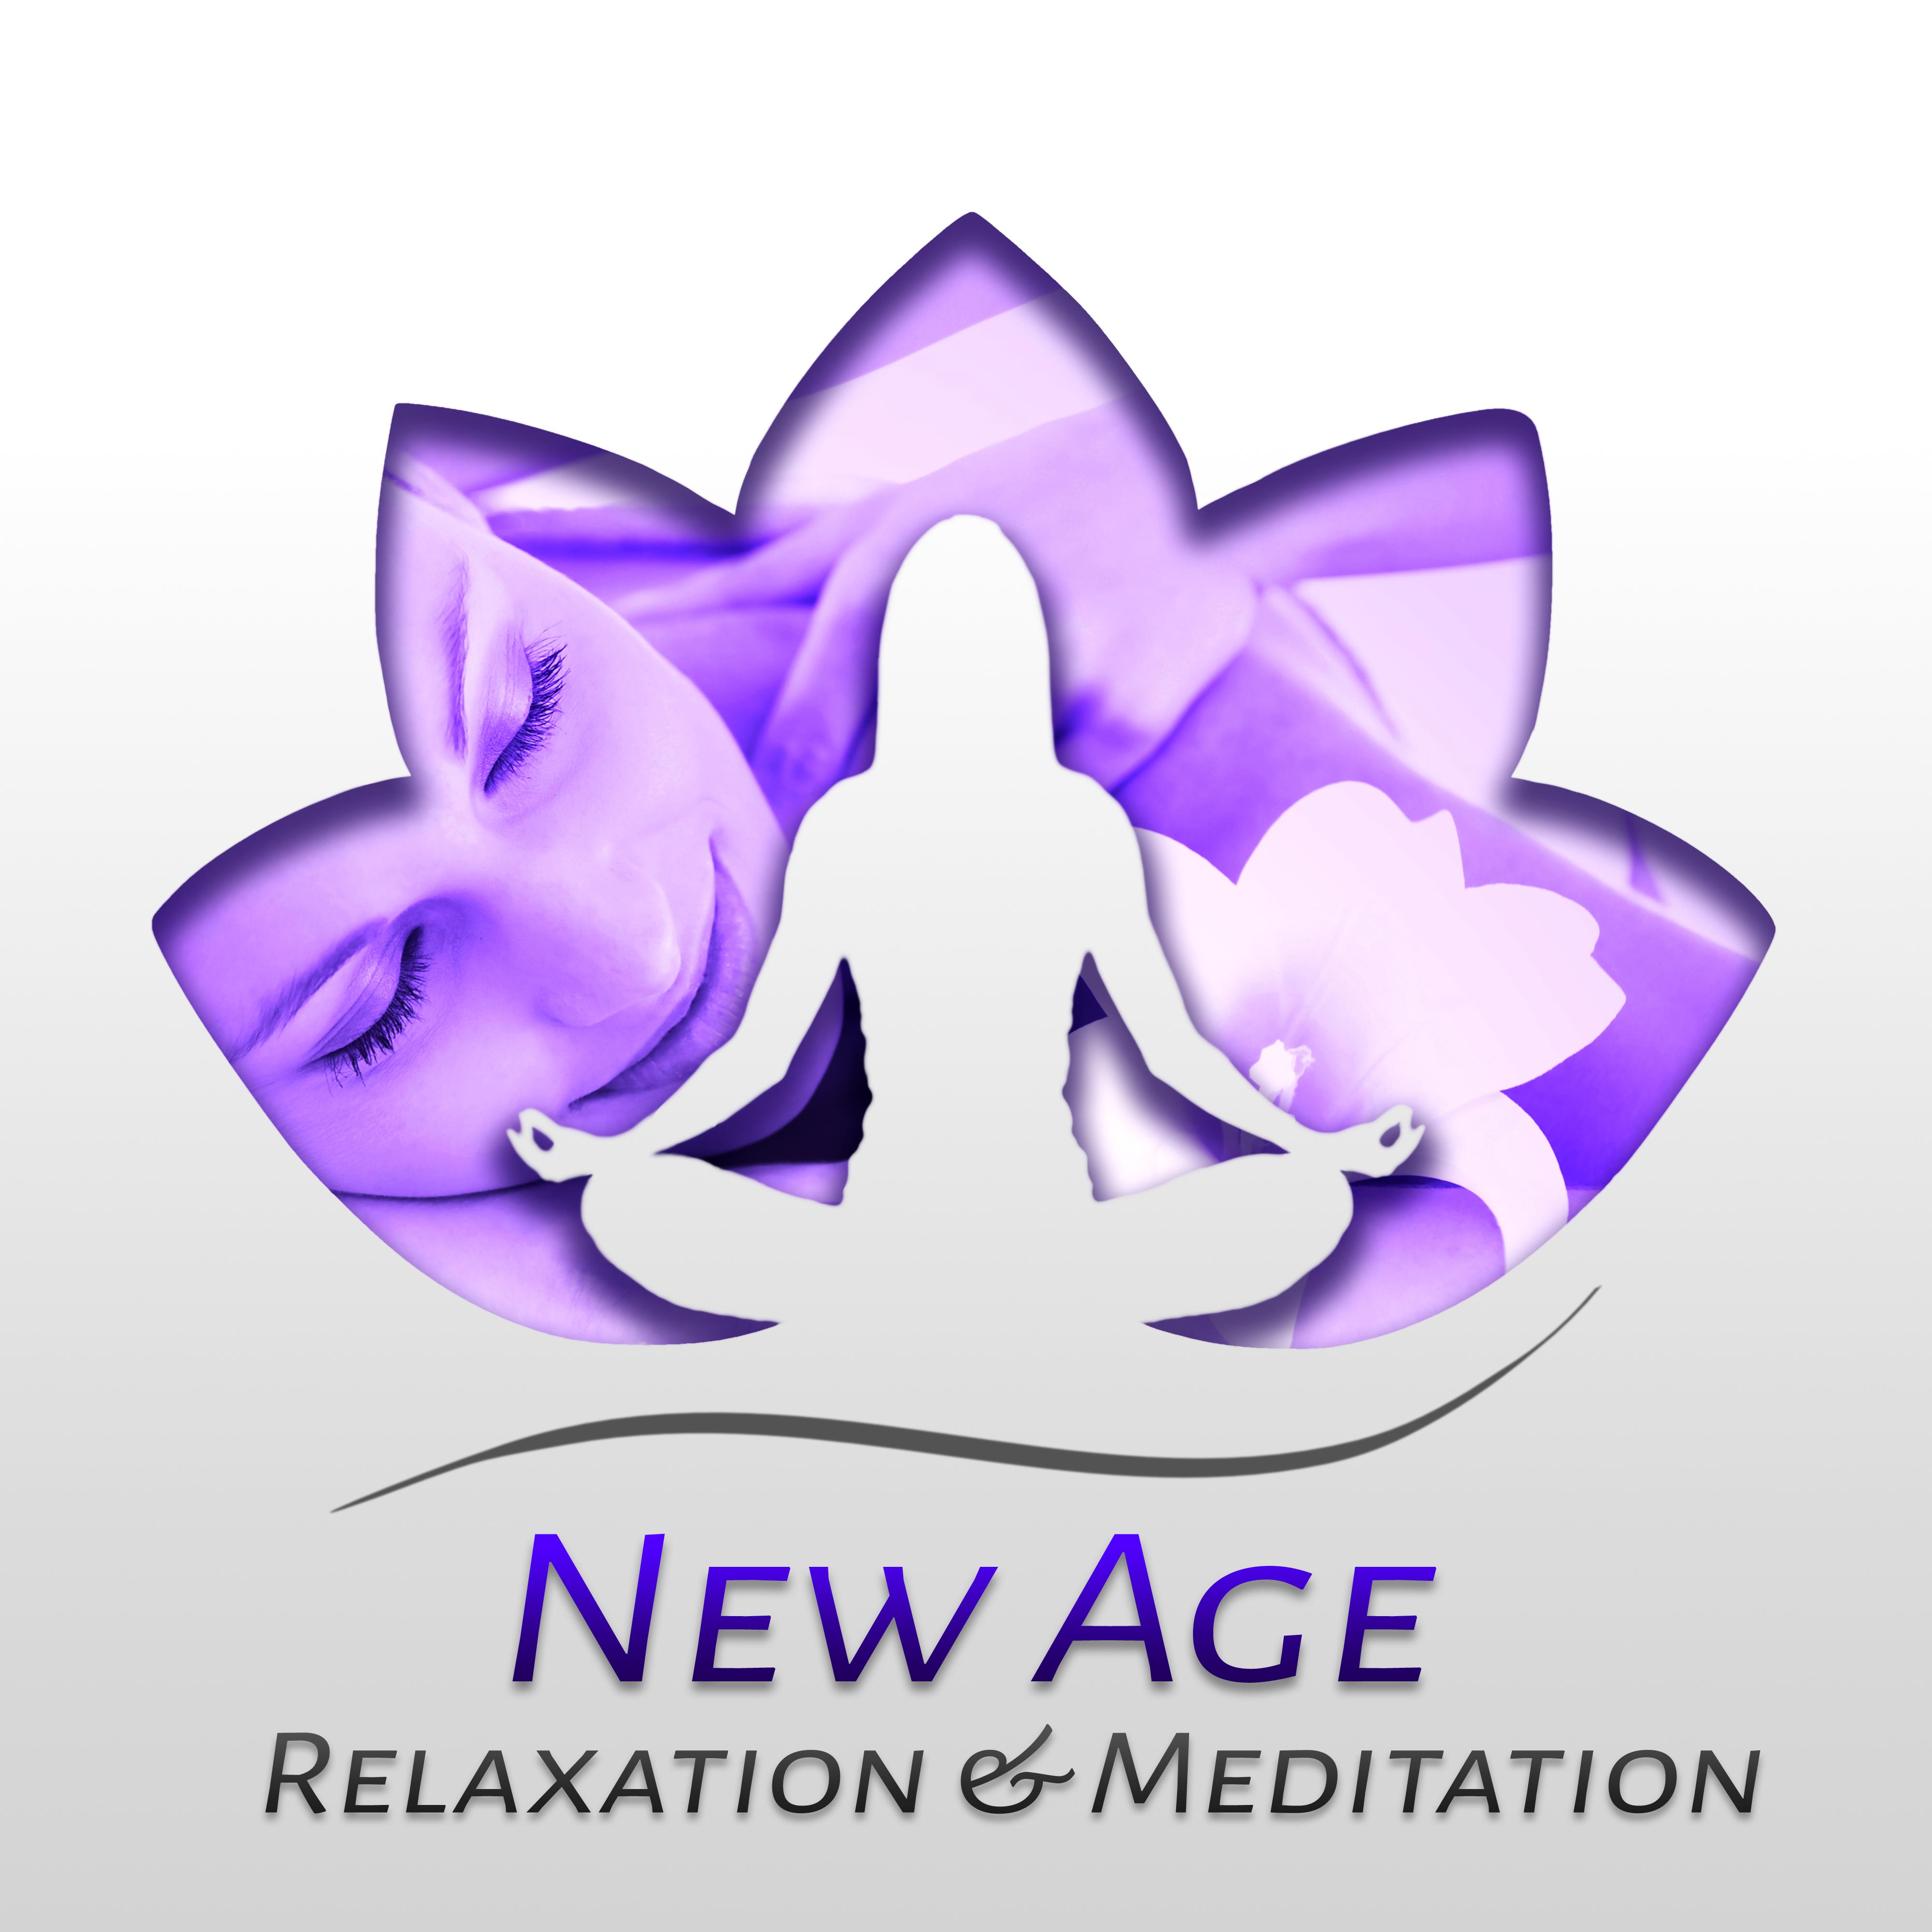 New Age Relaxation & Meditation